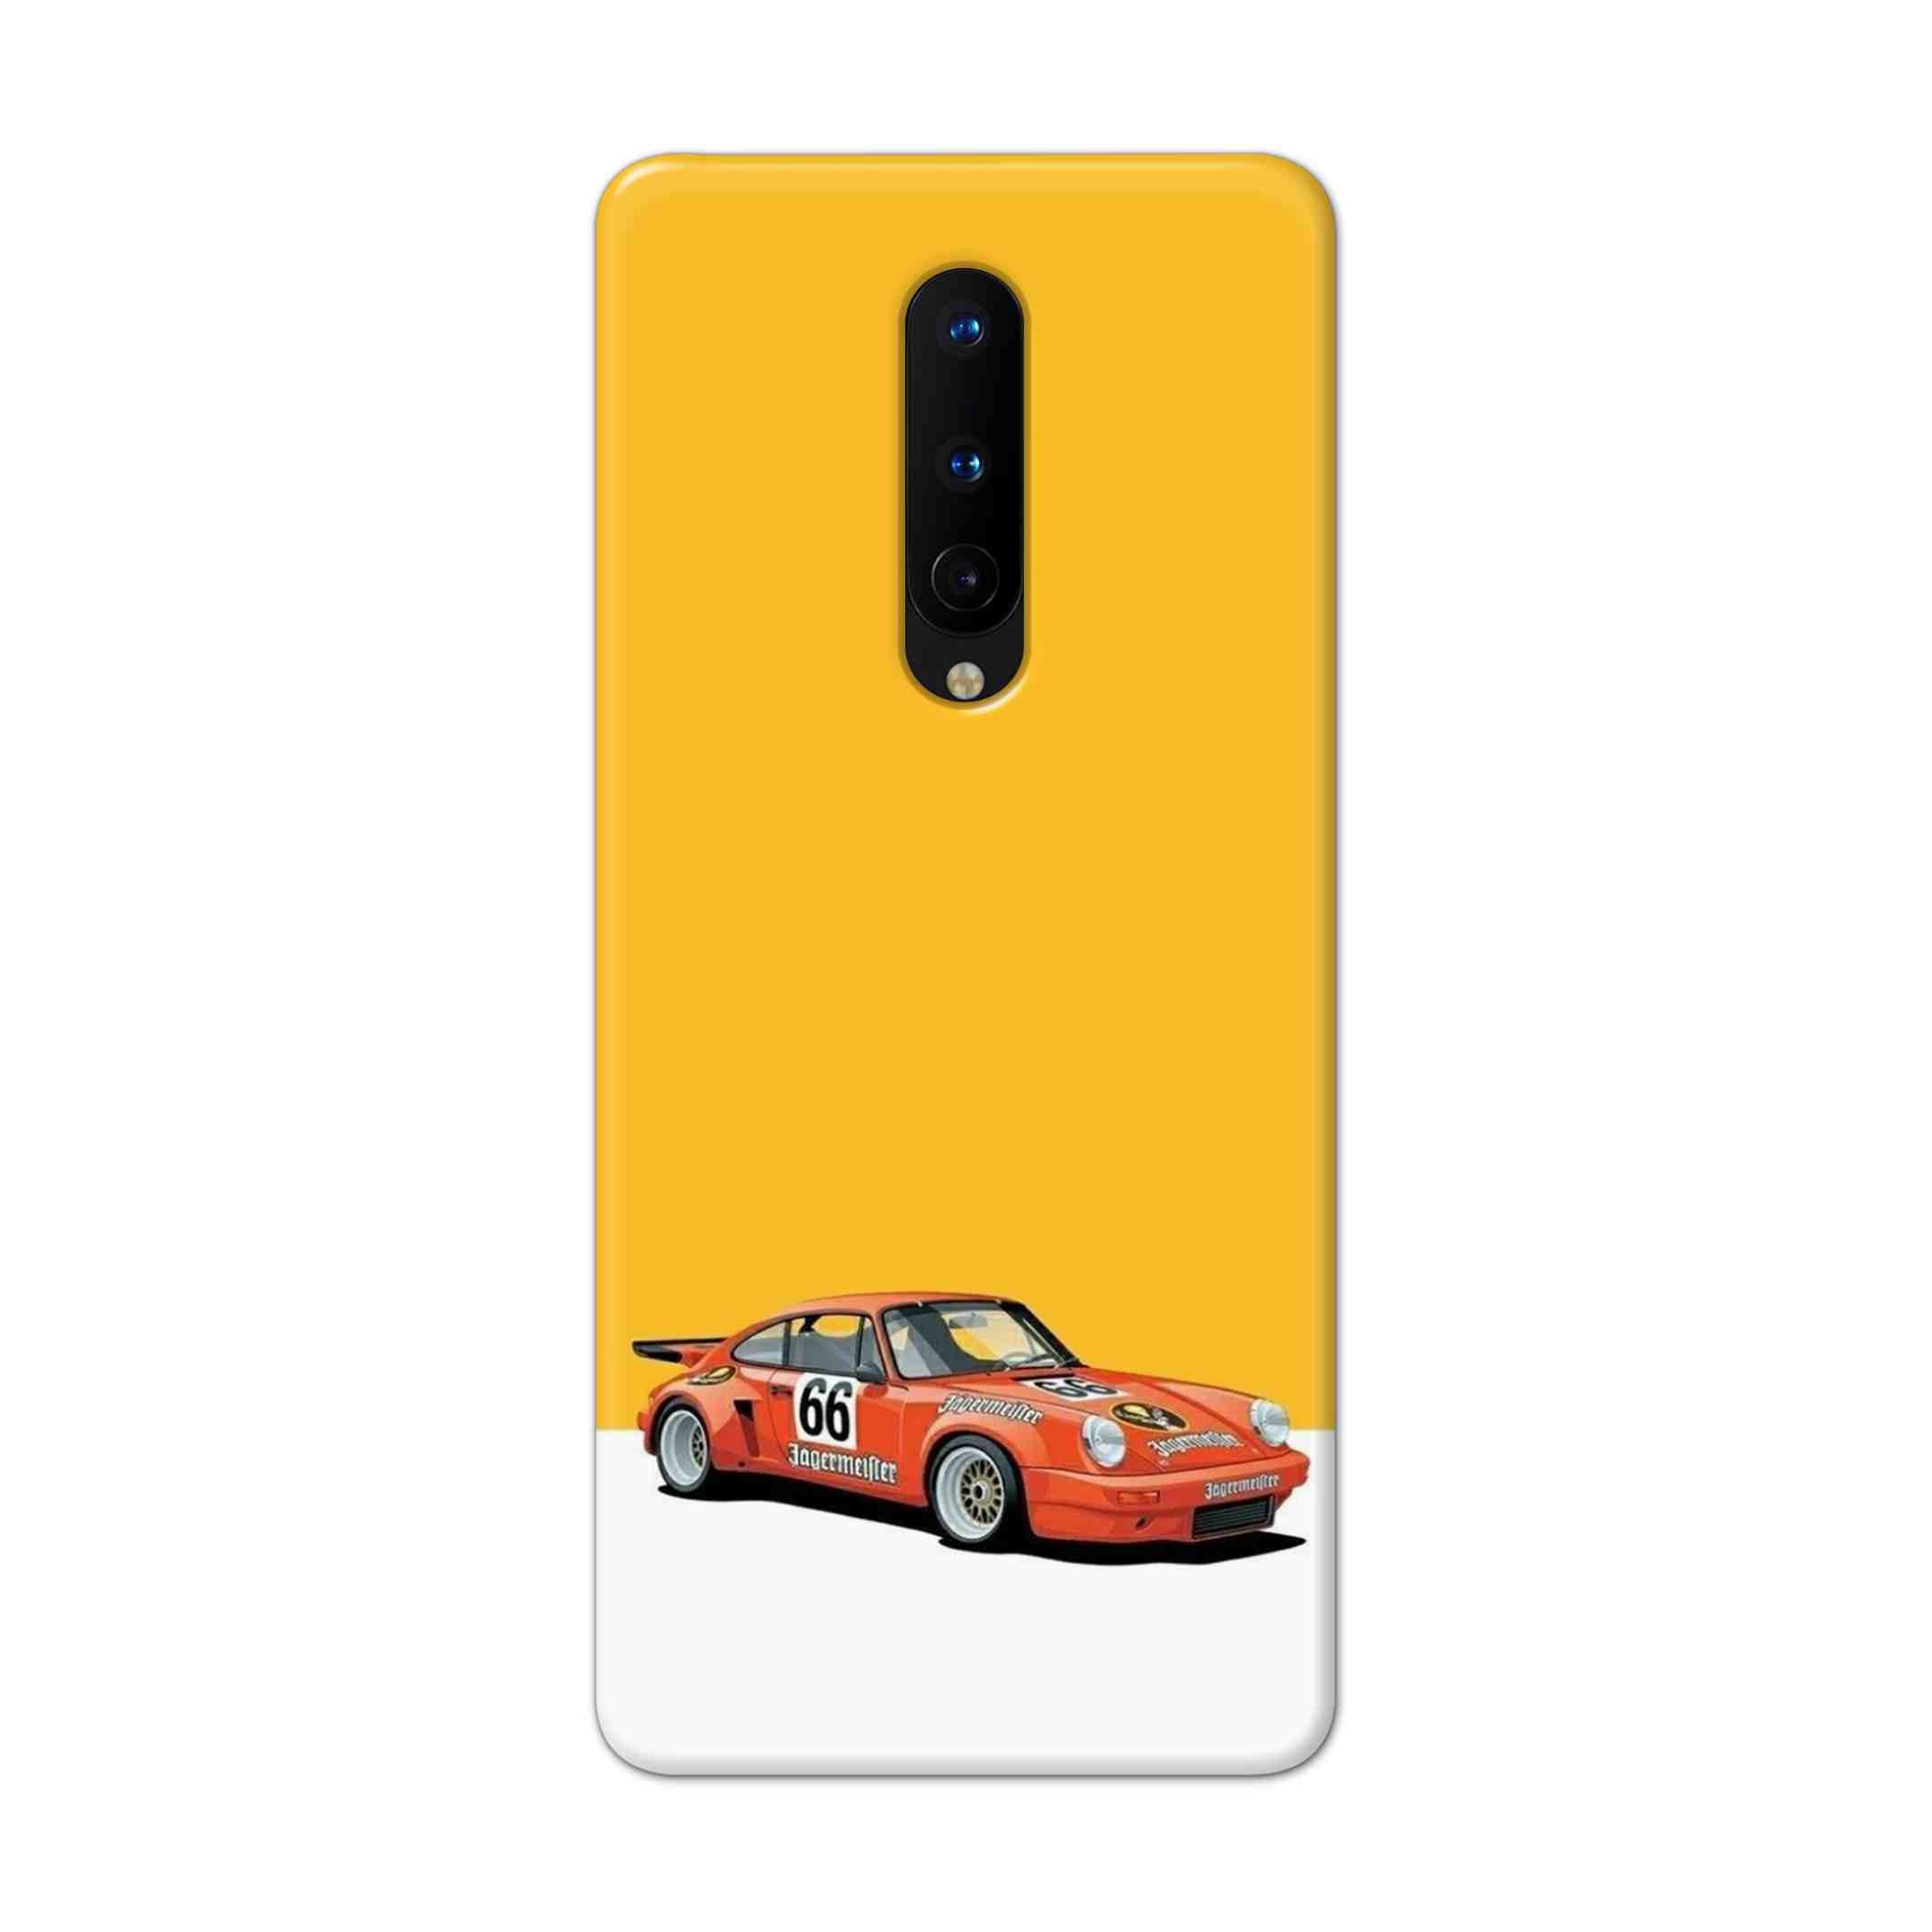 Buy Porche Hard Back Mobile Phone Case Cover For OnePlus 8 Online